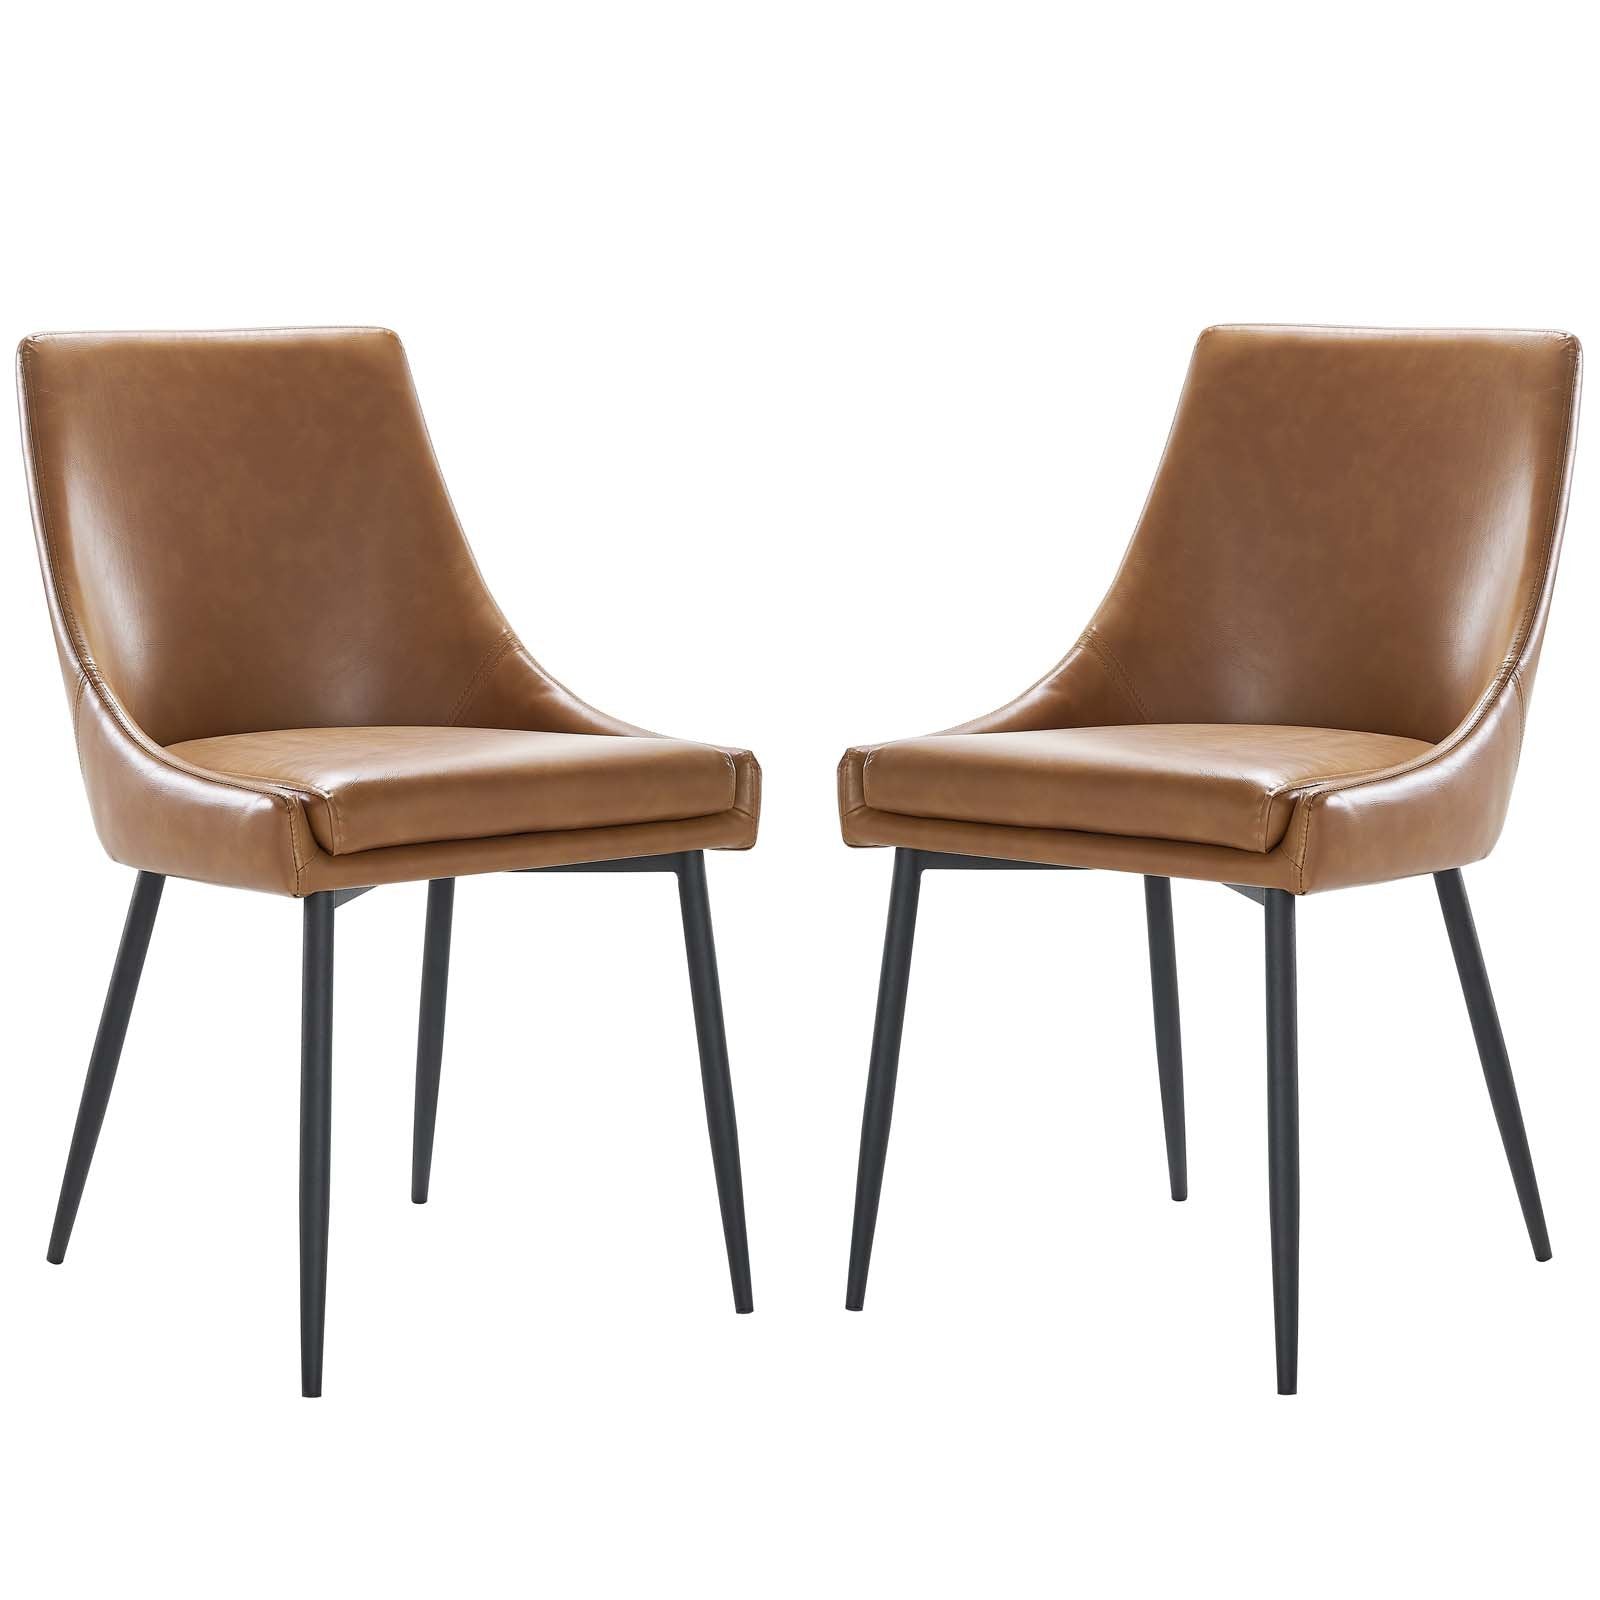 Viscount Vegan Leather Dining Chairs - Set of 2 - East Shore Modern Home Furnishings